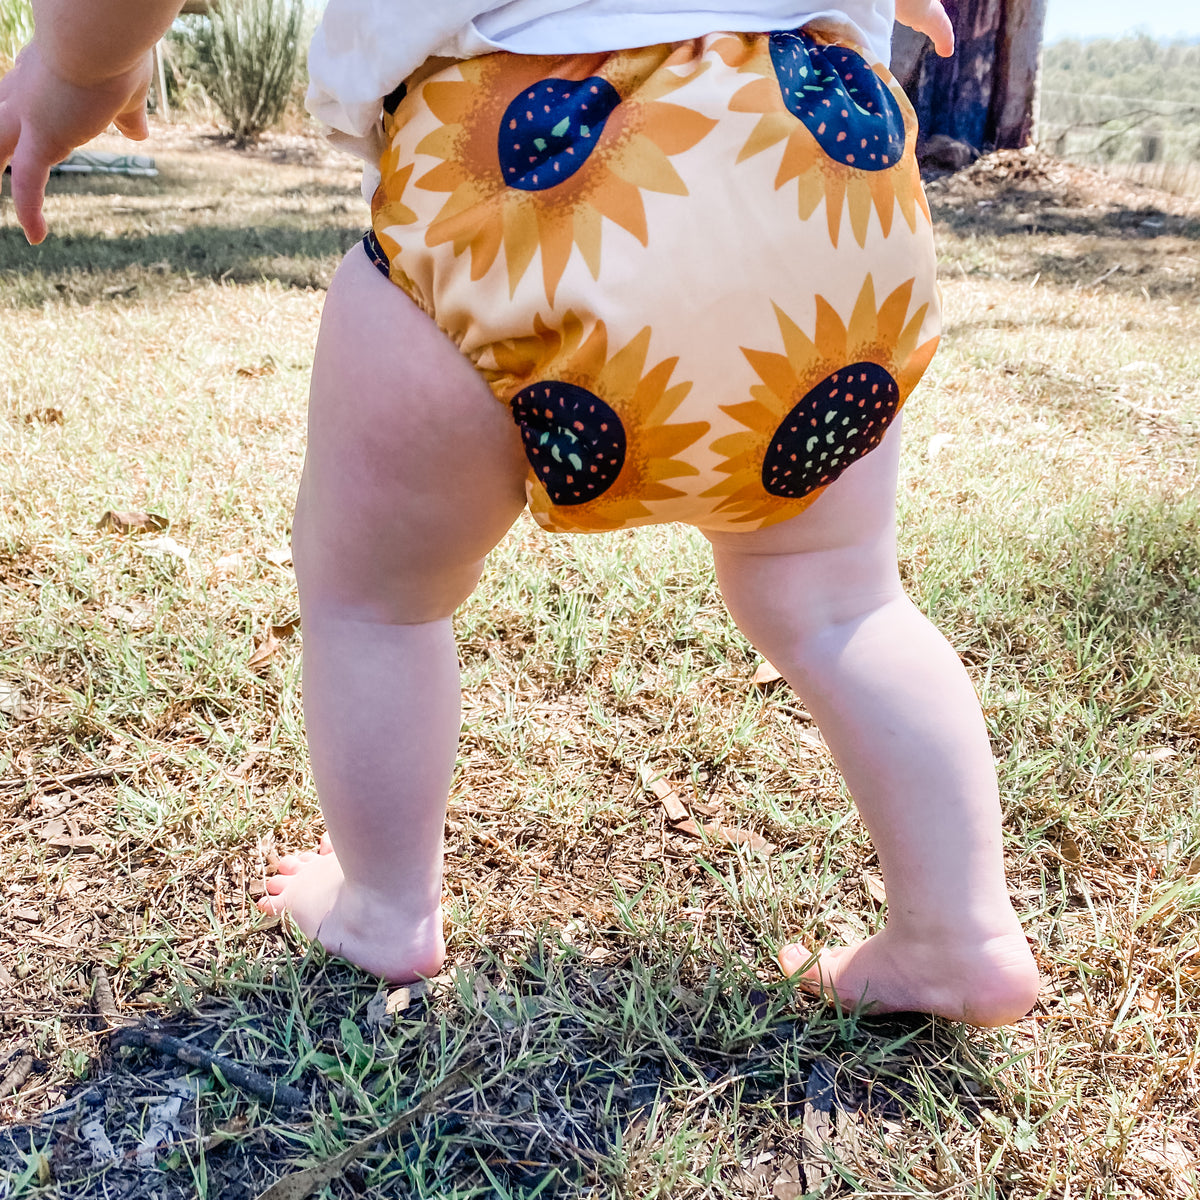 Shop reusable cloth nappies Australia. Ethically made, Australian owned, Tested by mums just like you